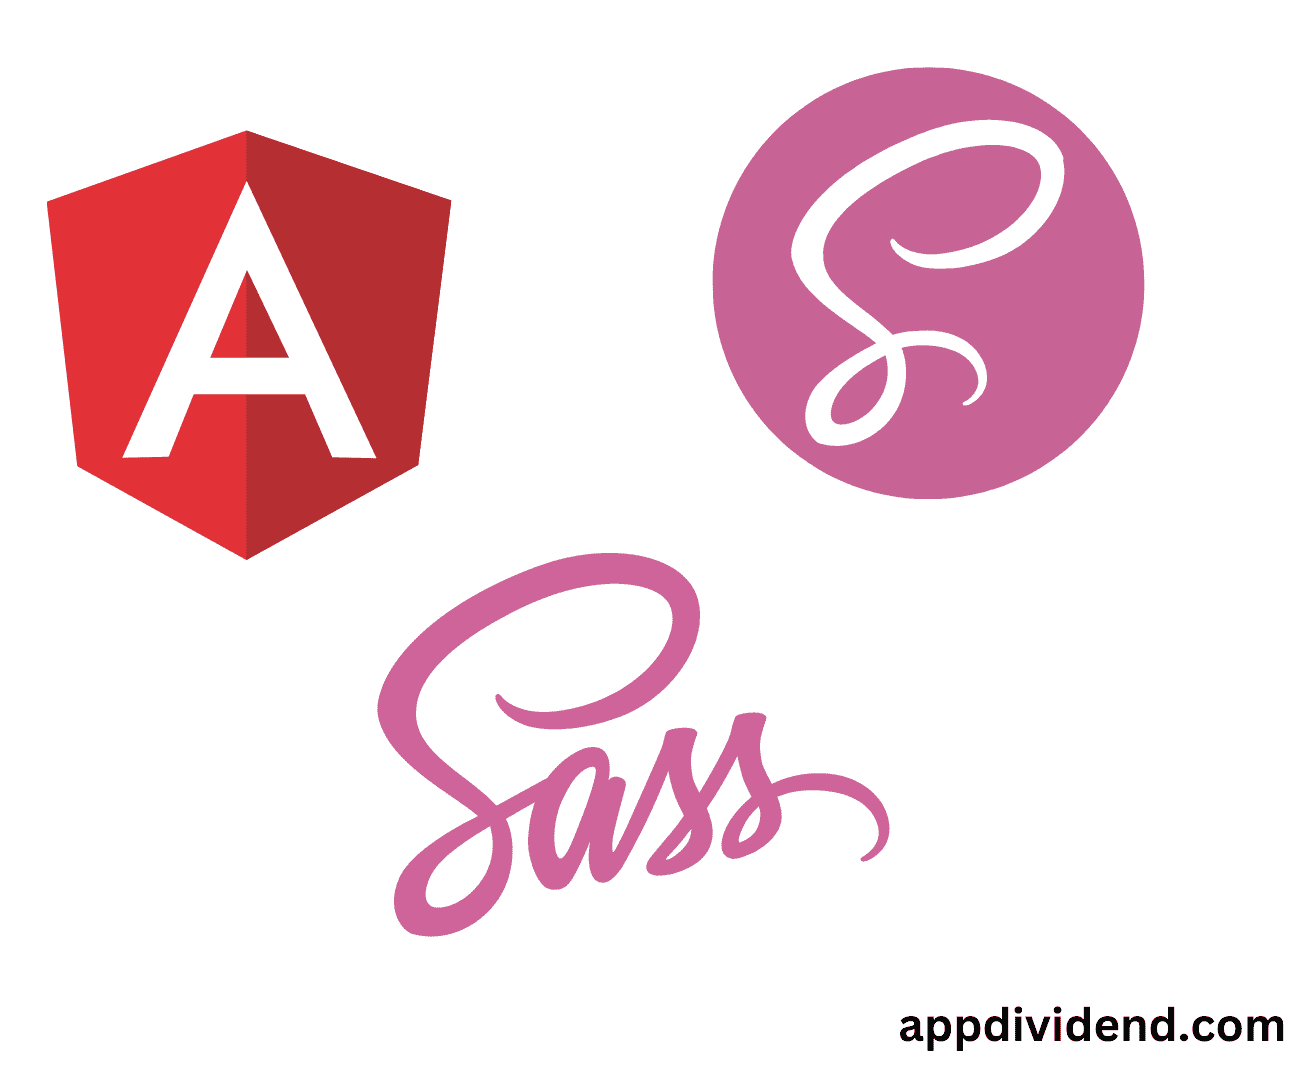 How to Use Sass in Angular